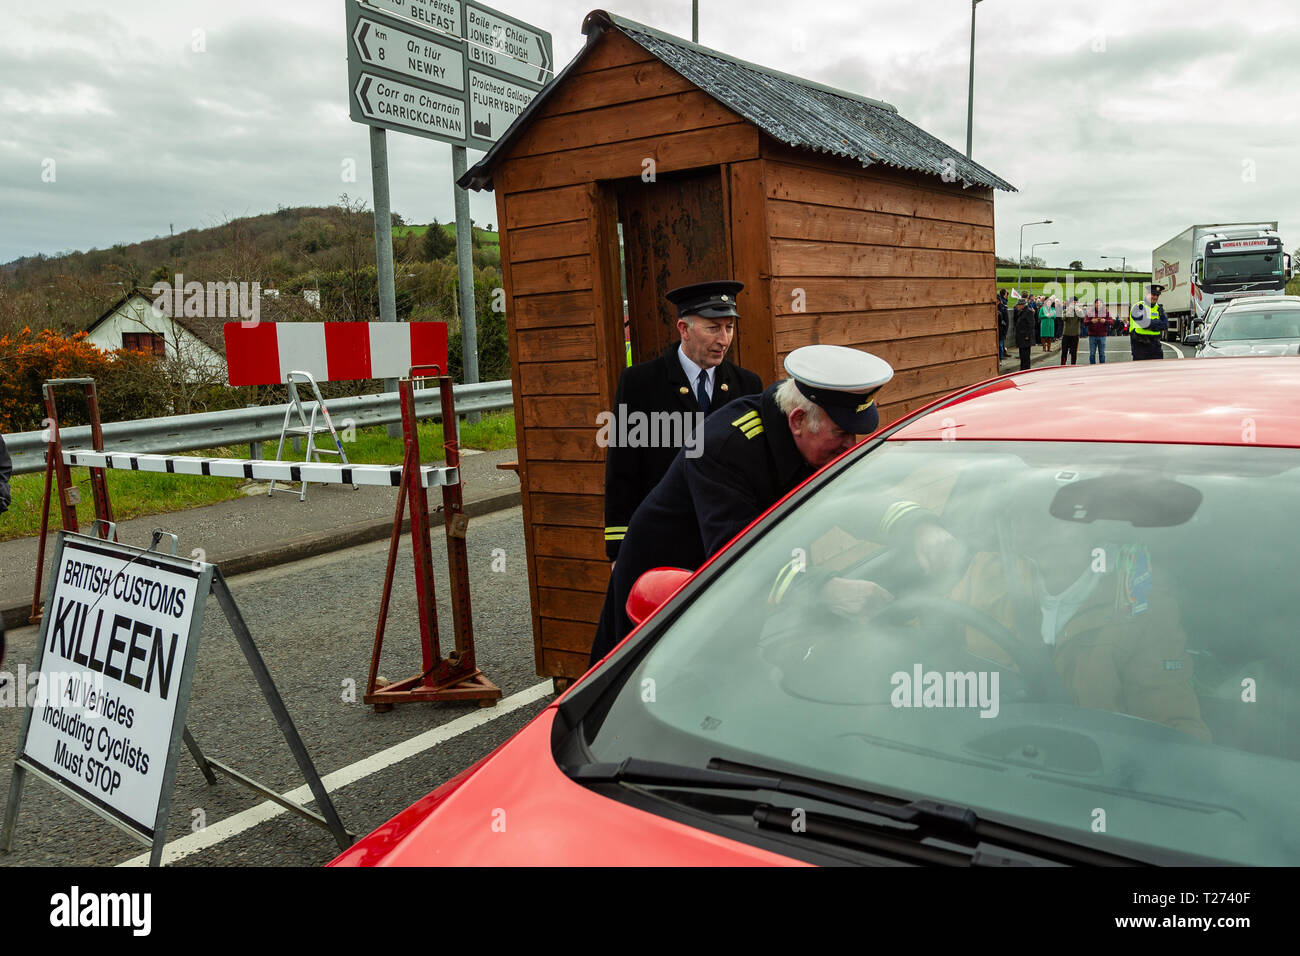 Dundalk Newry High Resolution Stock Photography and Images - Alamy